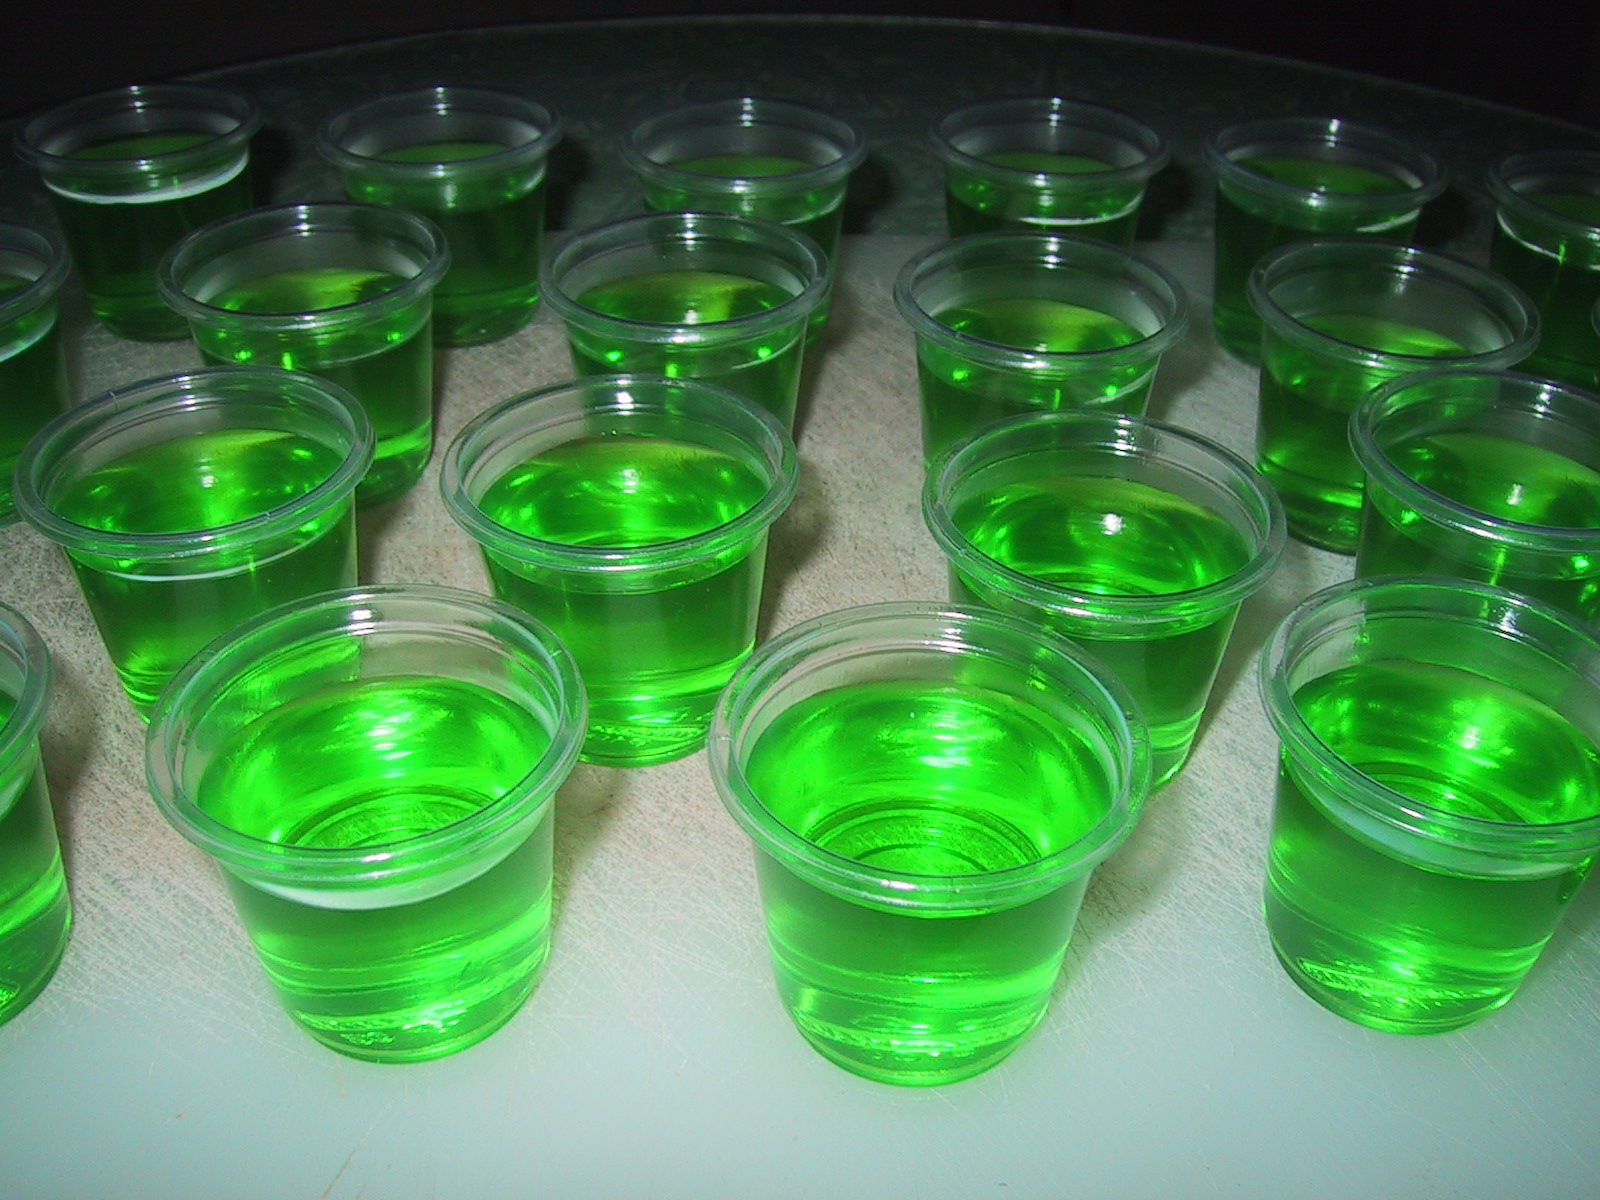 green drinks are arranged and ready for a party